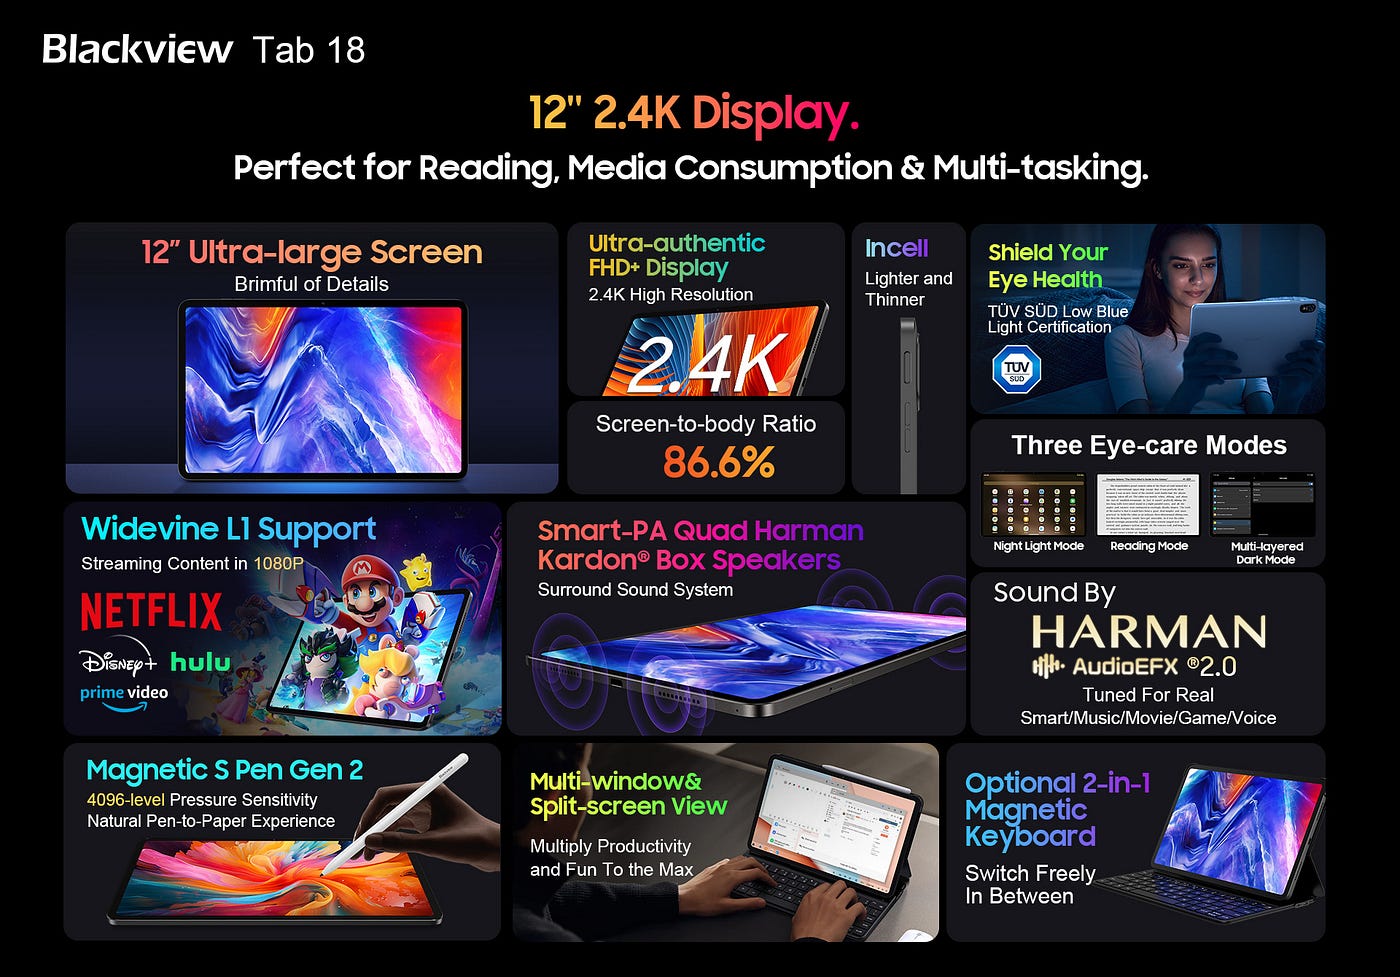 Revolutionary Blackview Tab 18: A Game-Changing Tablet